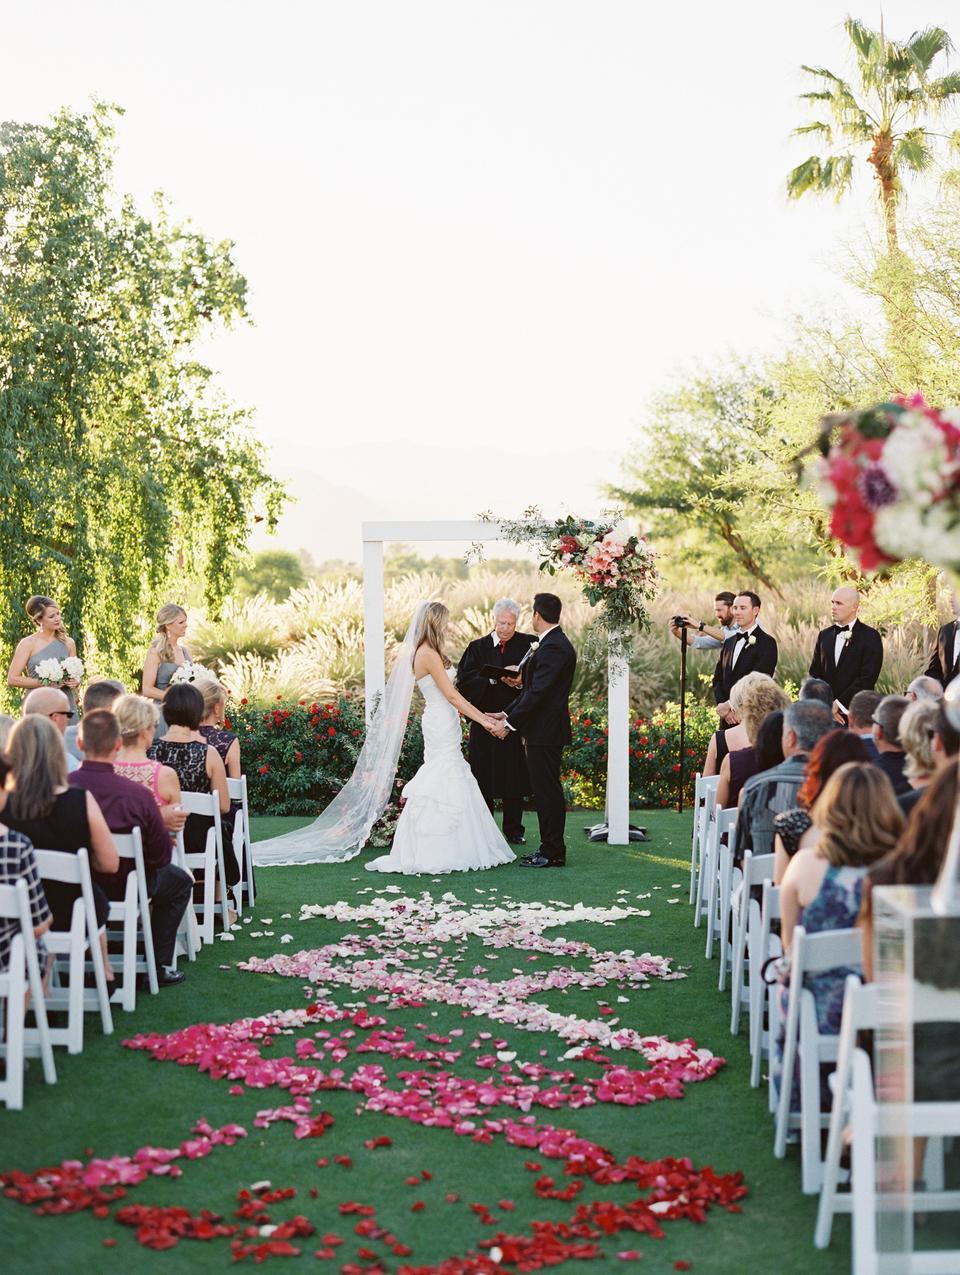 glam outdoor wedding aisle decor ombre pink and red rose petals in swirled pattern down the aisle